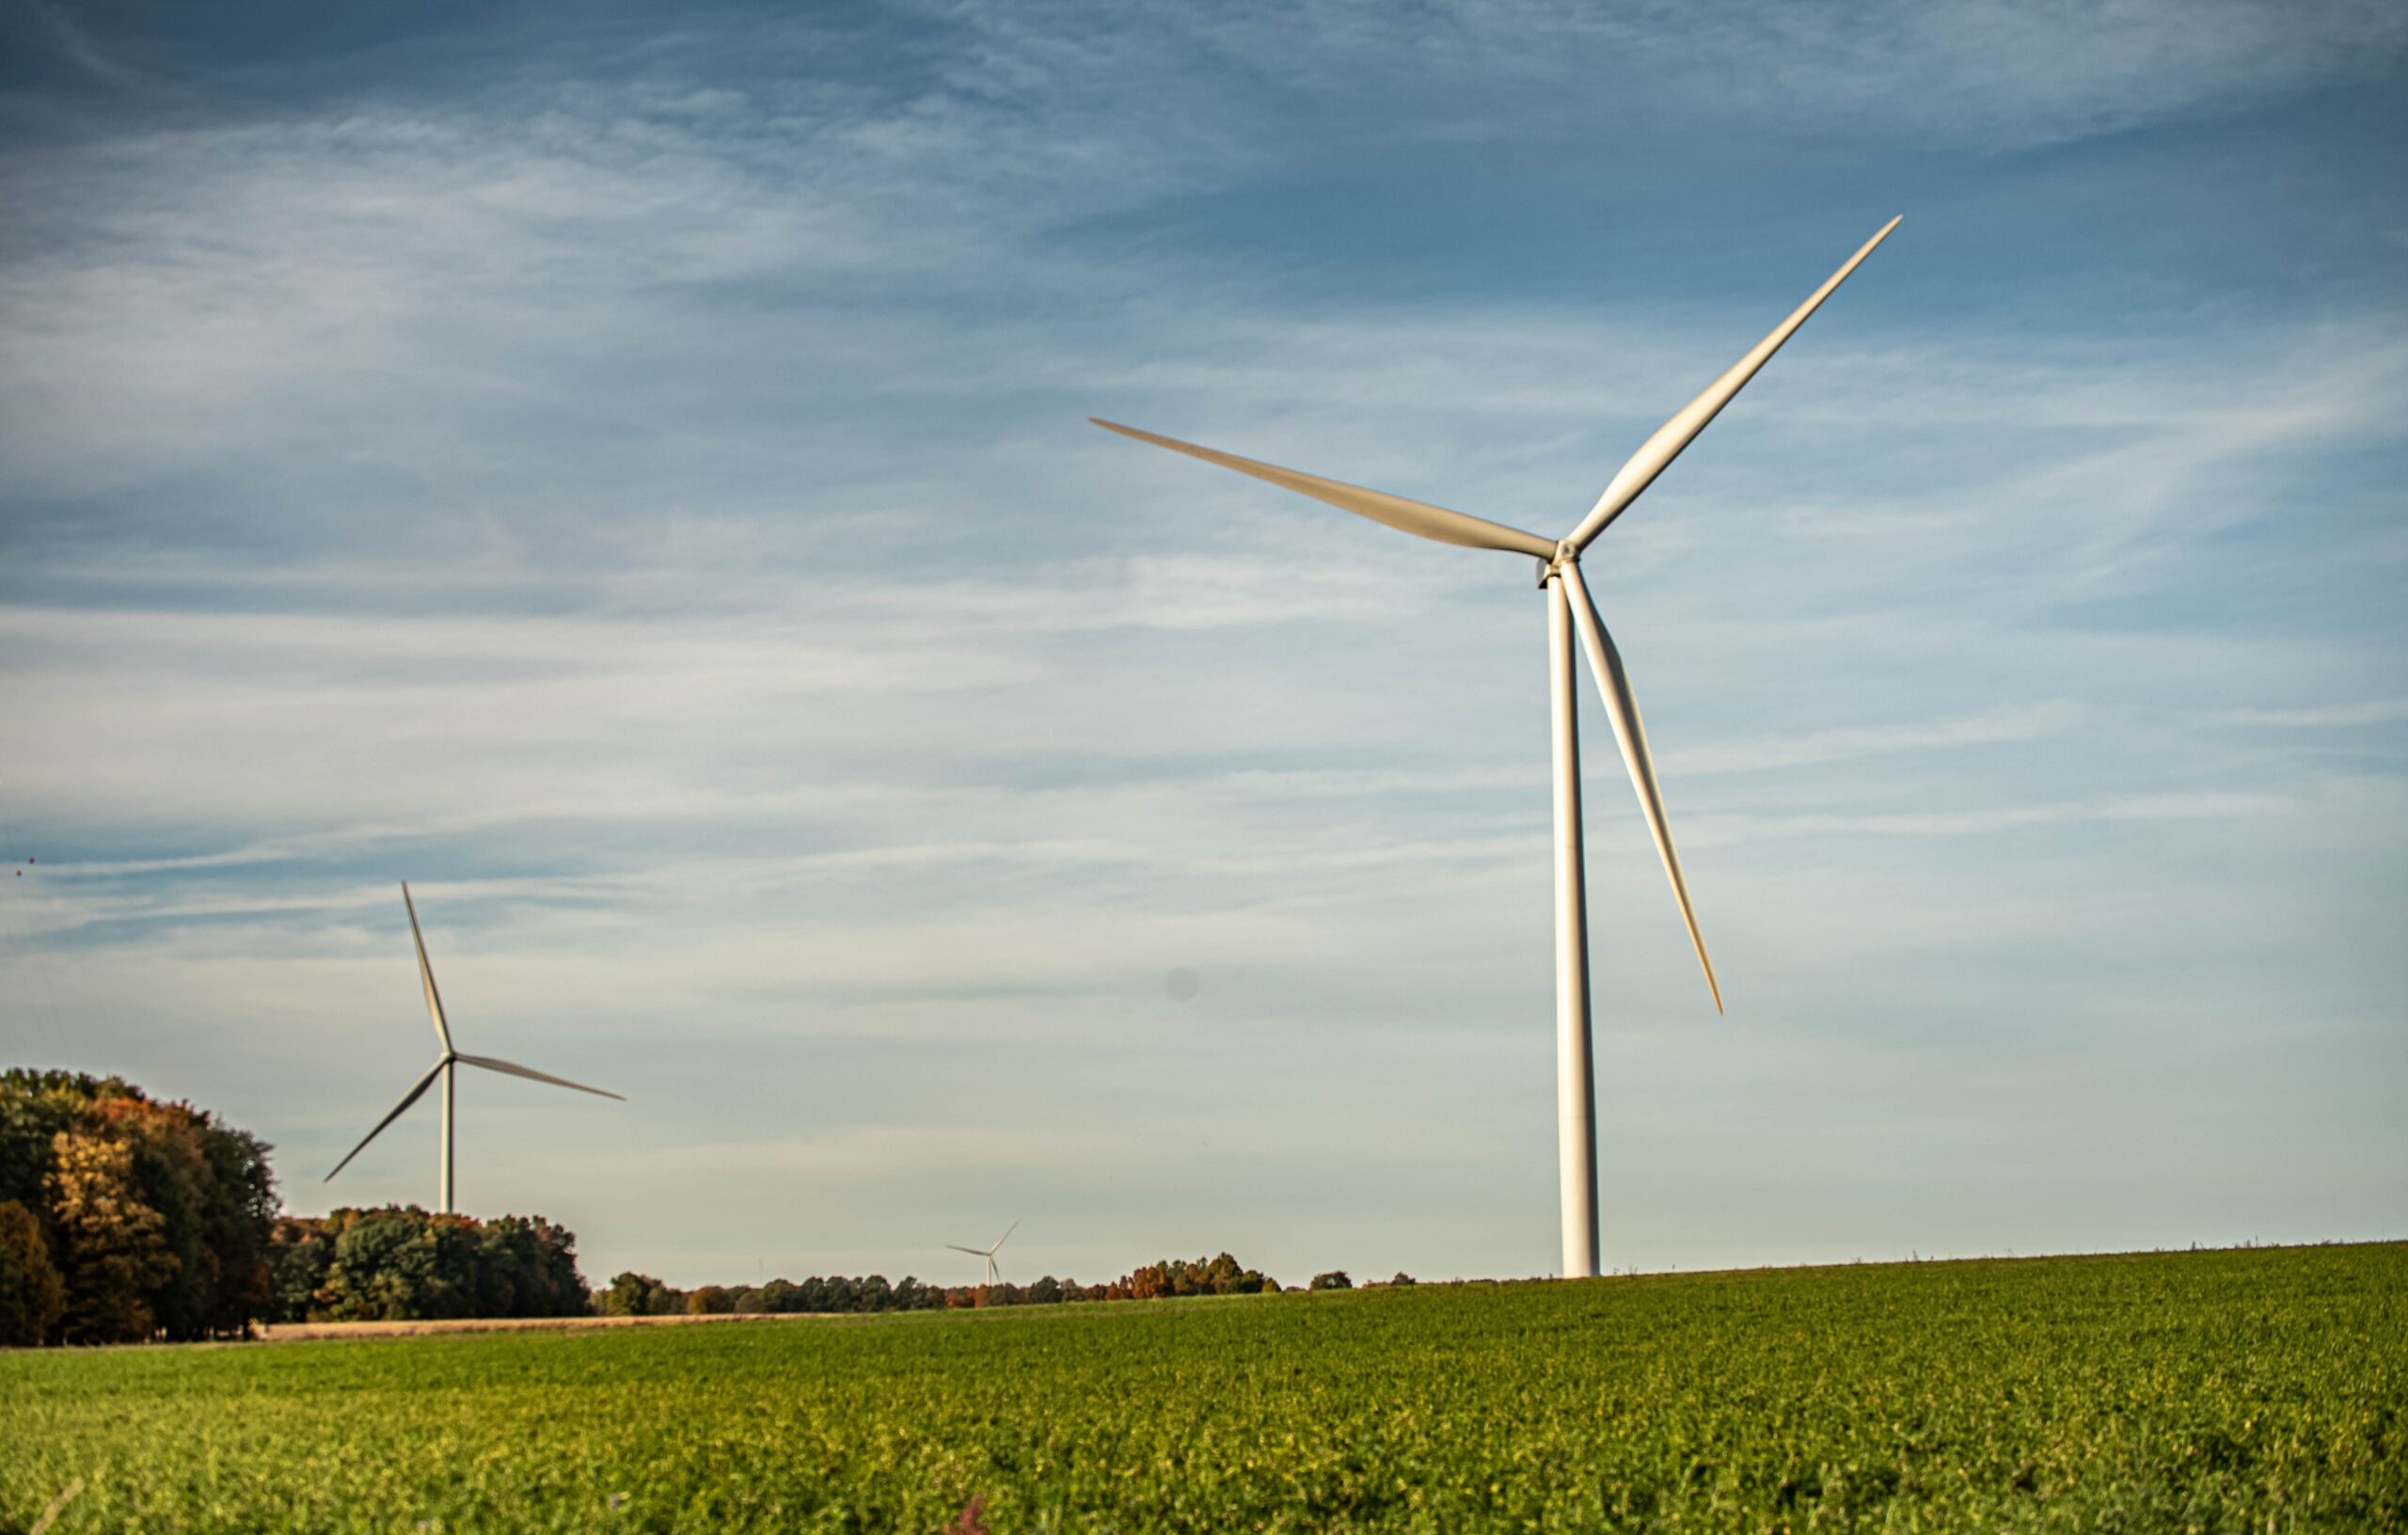 Xcel Energy Commits to 100% Carbon-Free Electricity by 2050 with Help from South Dakota Wind Farms